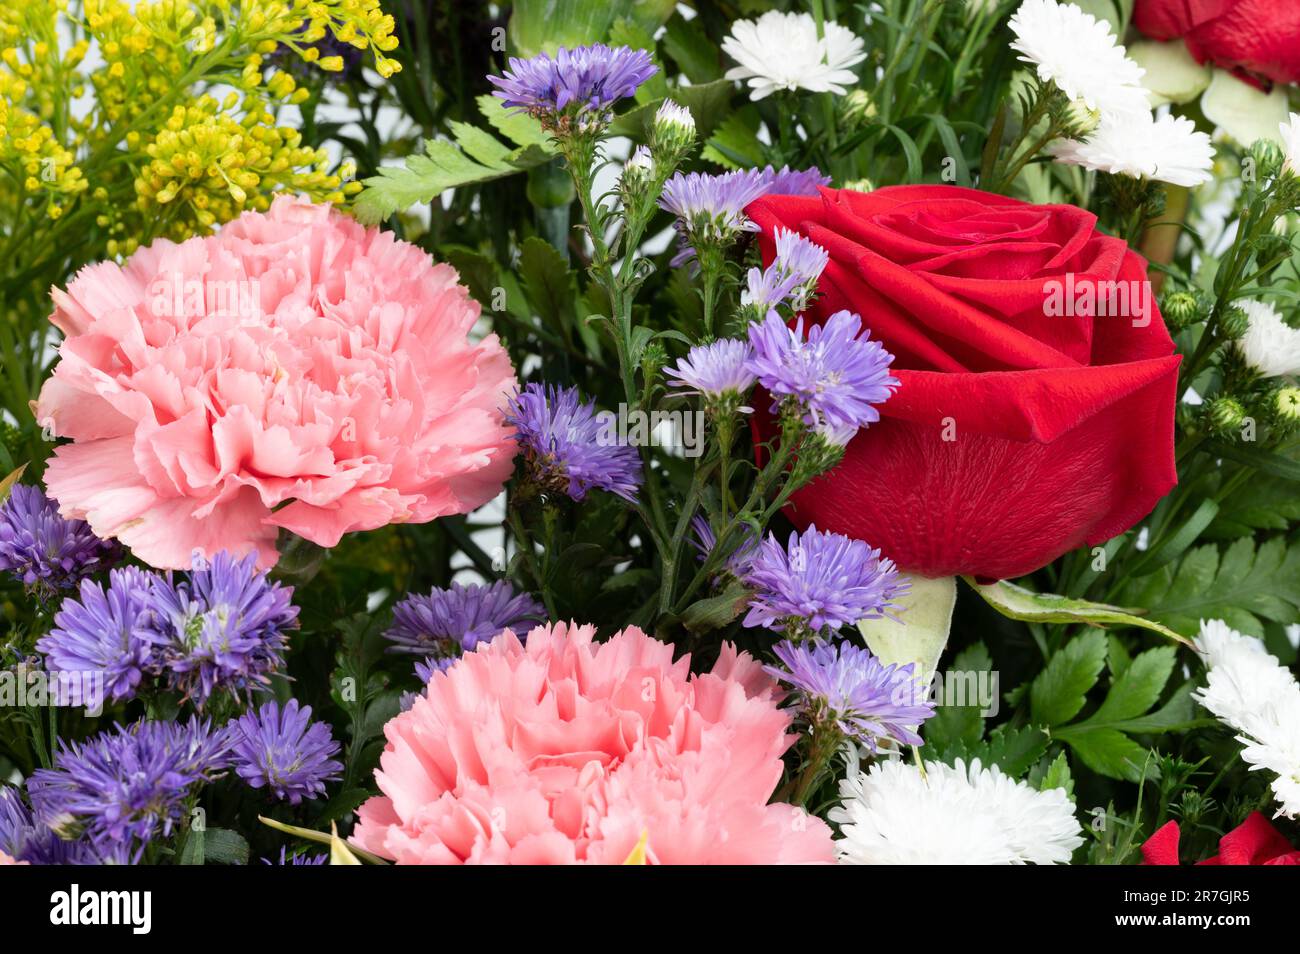 Red pink purple flower bouquet background macro close up view Stock Photo